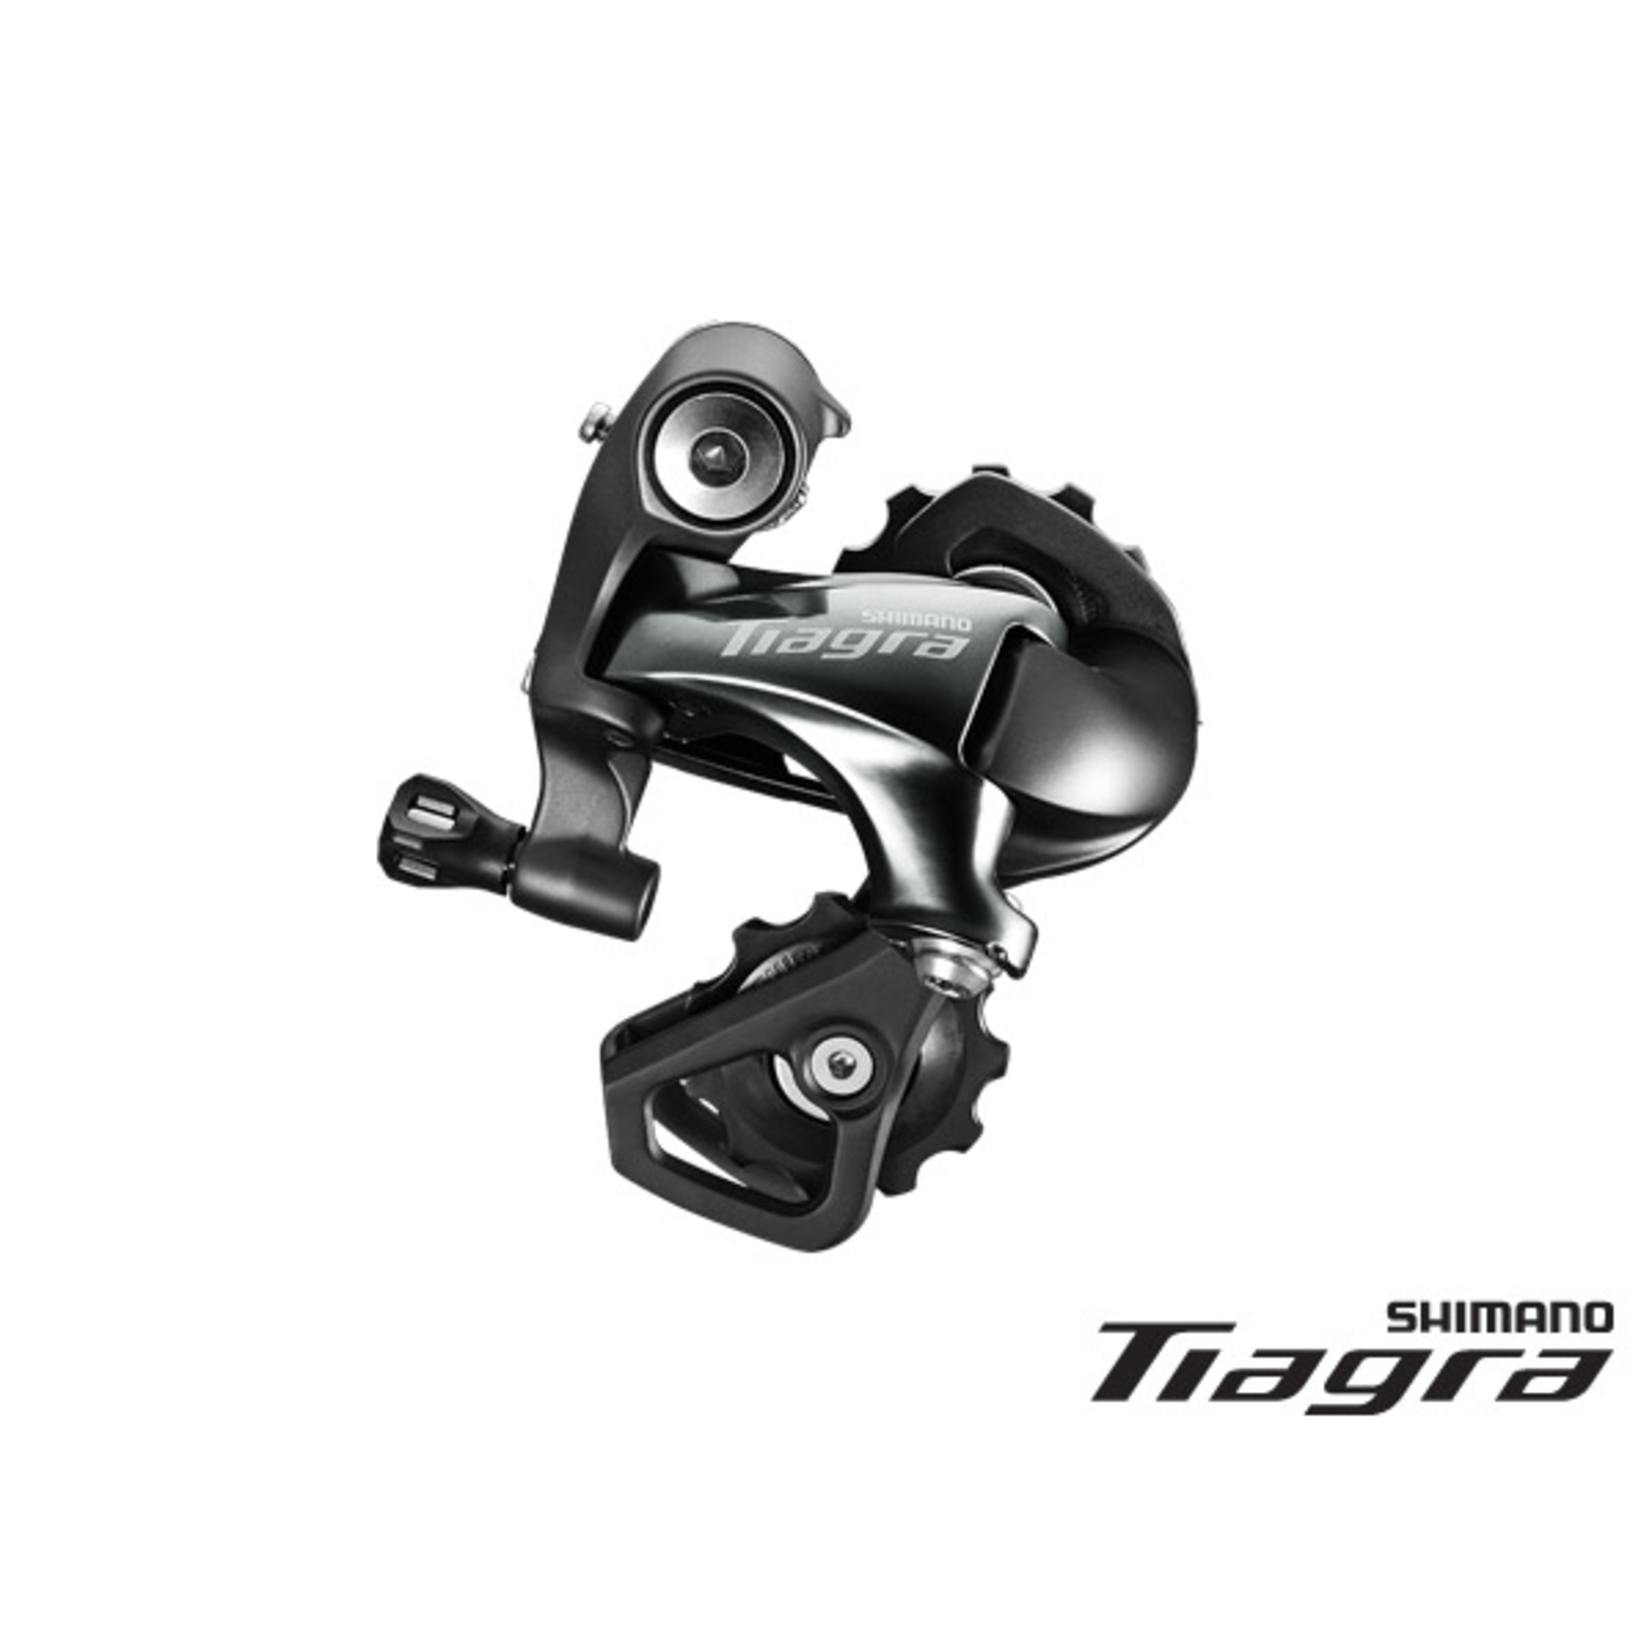 Shimano RD-4700 REAR DERAILLUER TIAGRA 10-SPEED DOUBLE 28T COMPATIBLE *4700 ONLY*